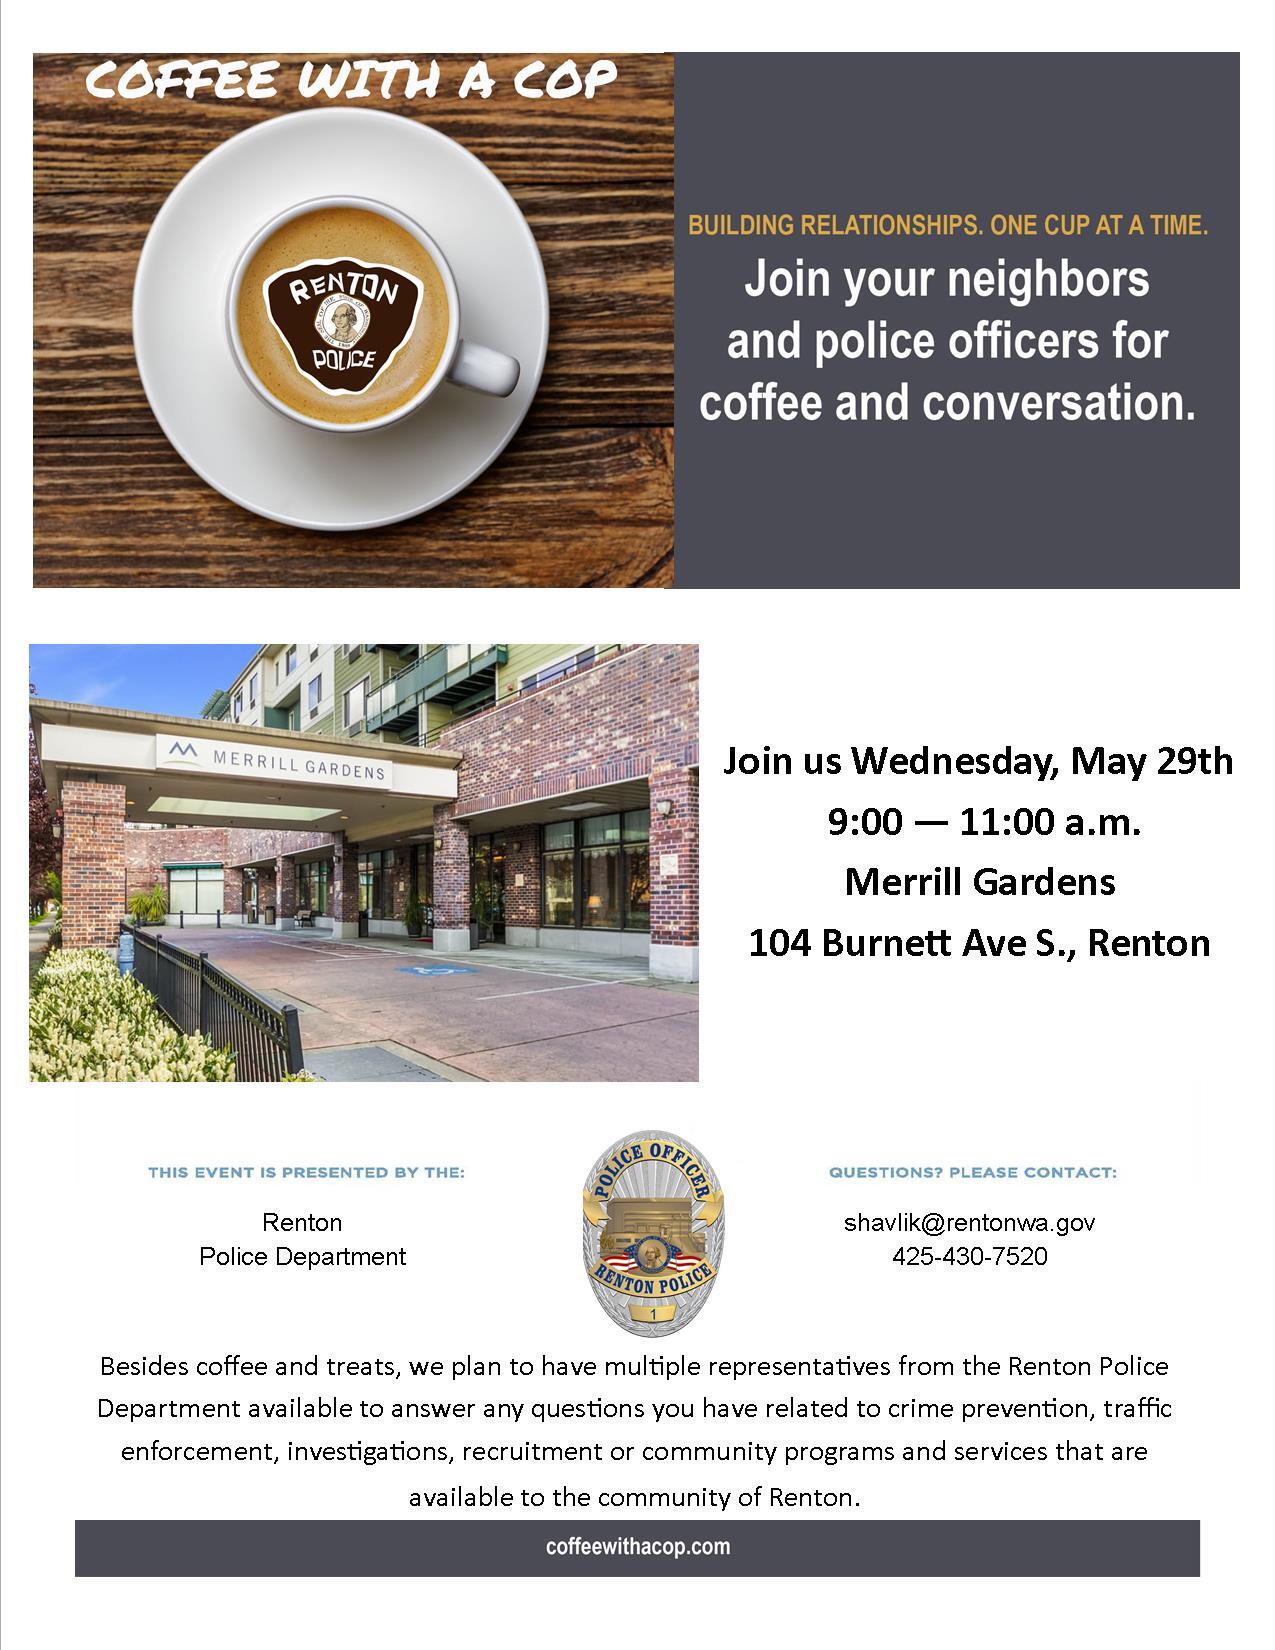 Coffee With A Cop Merrill Gardens Renton Police Department